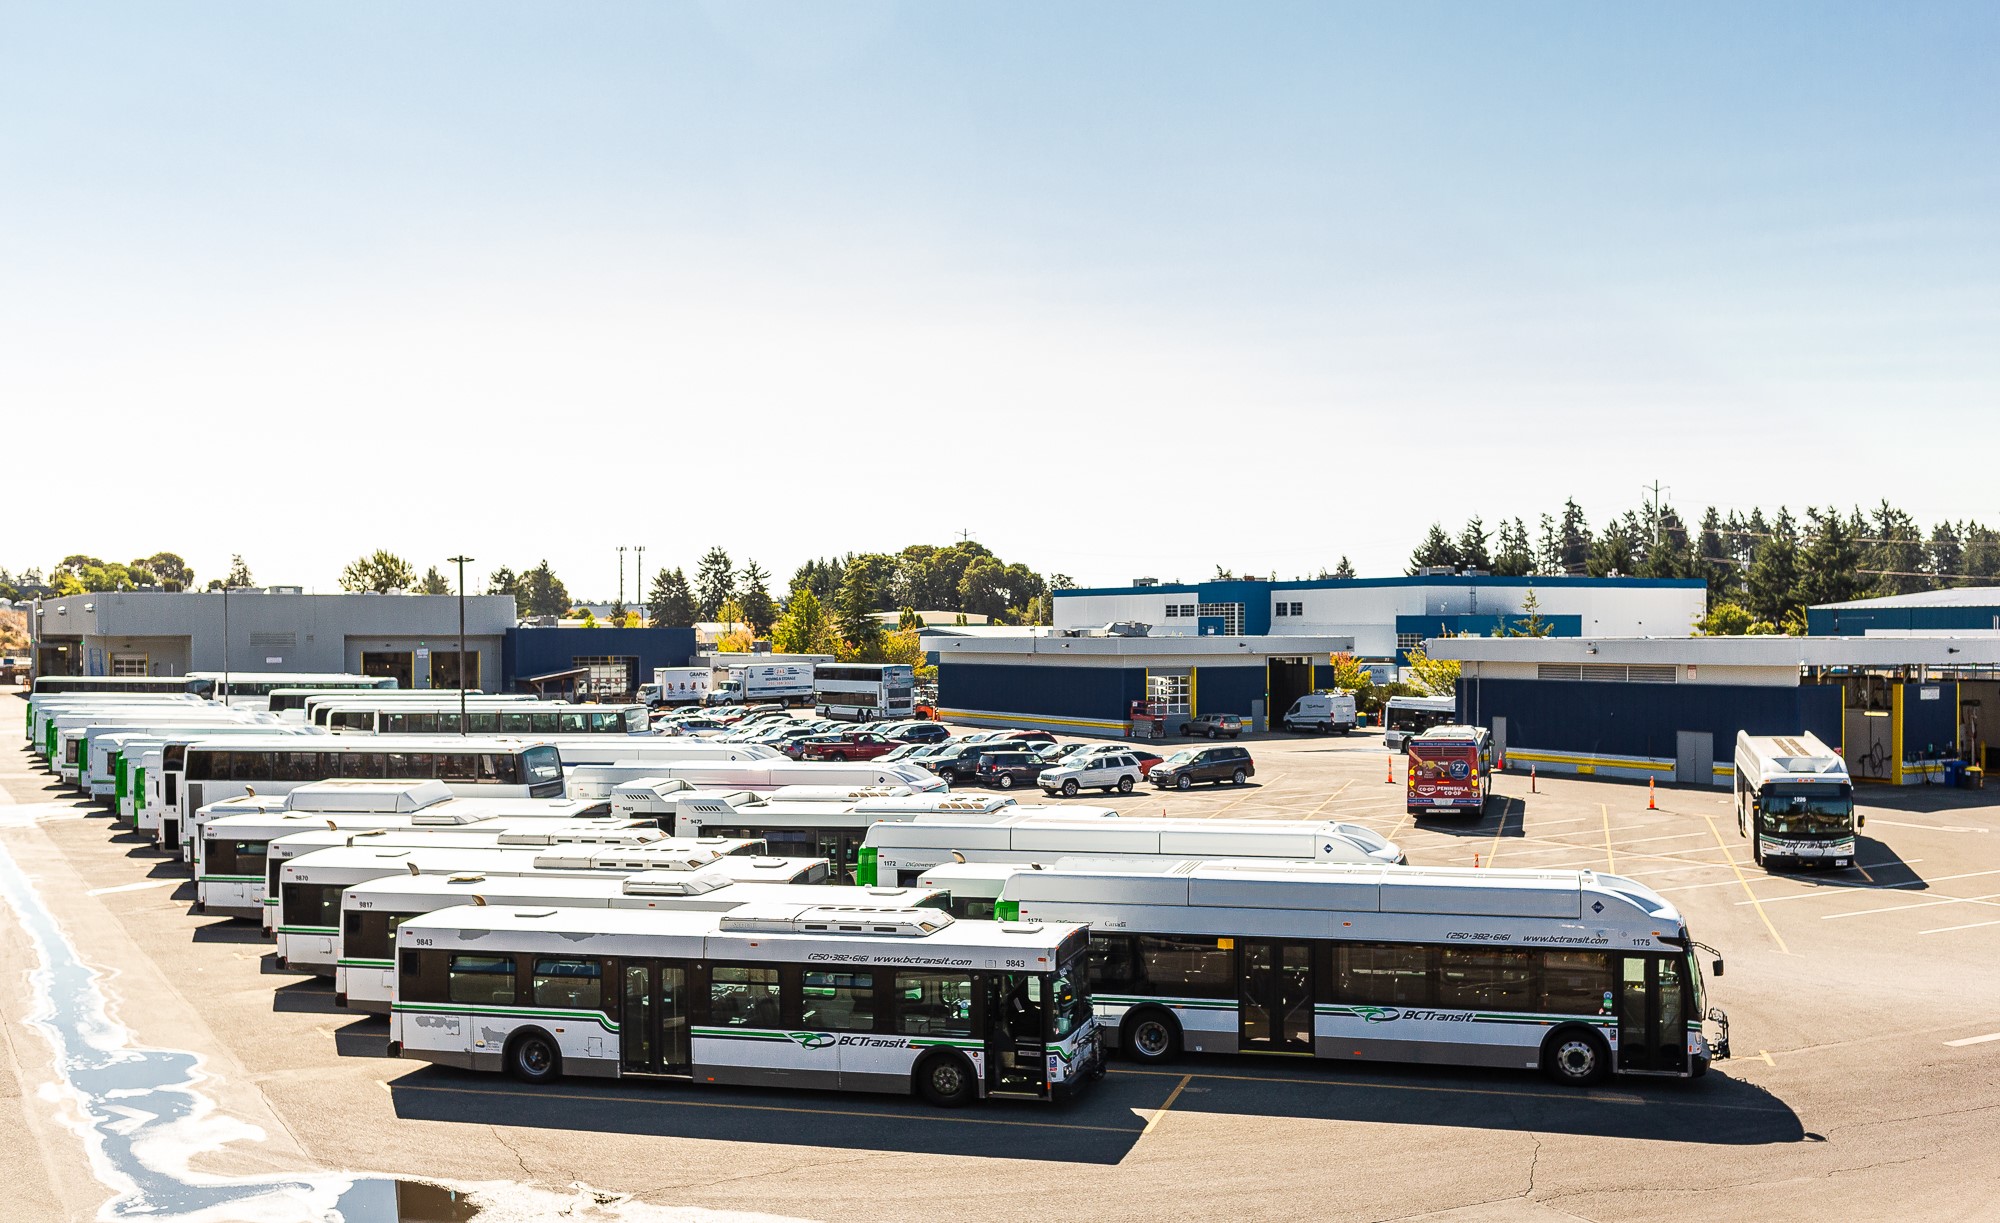 BC Transit buses in the bus yard